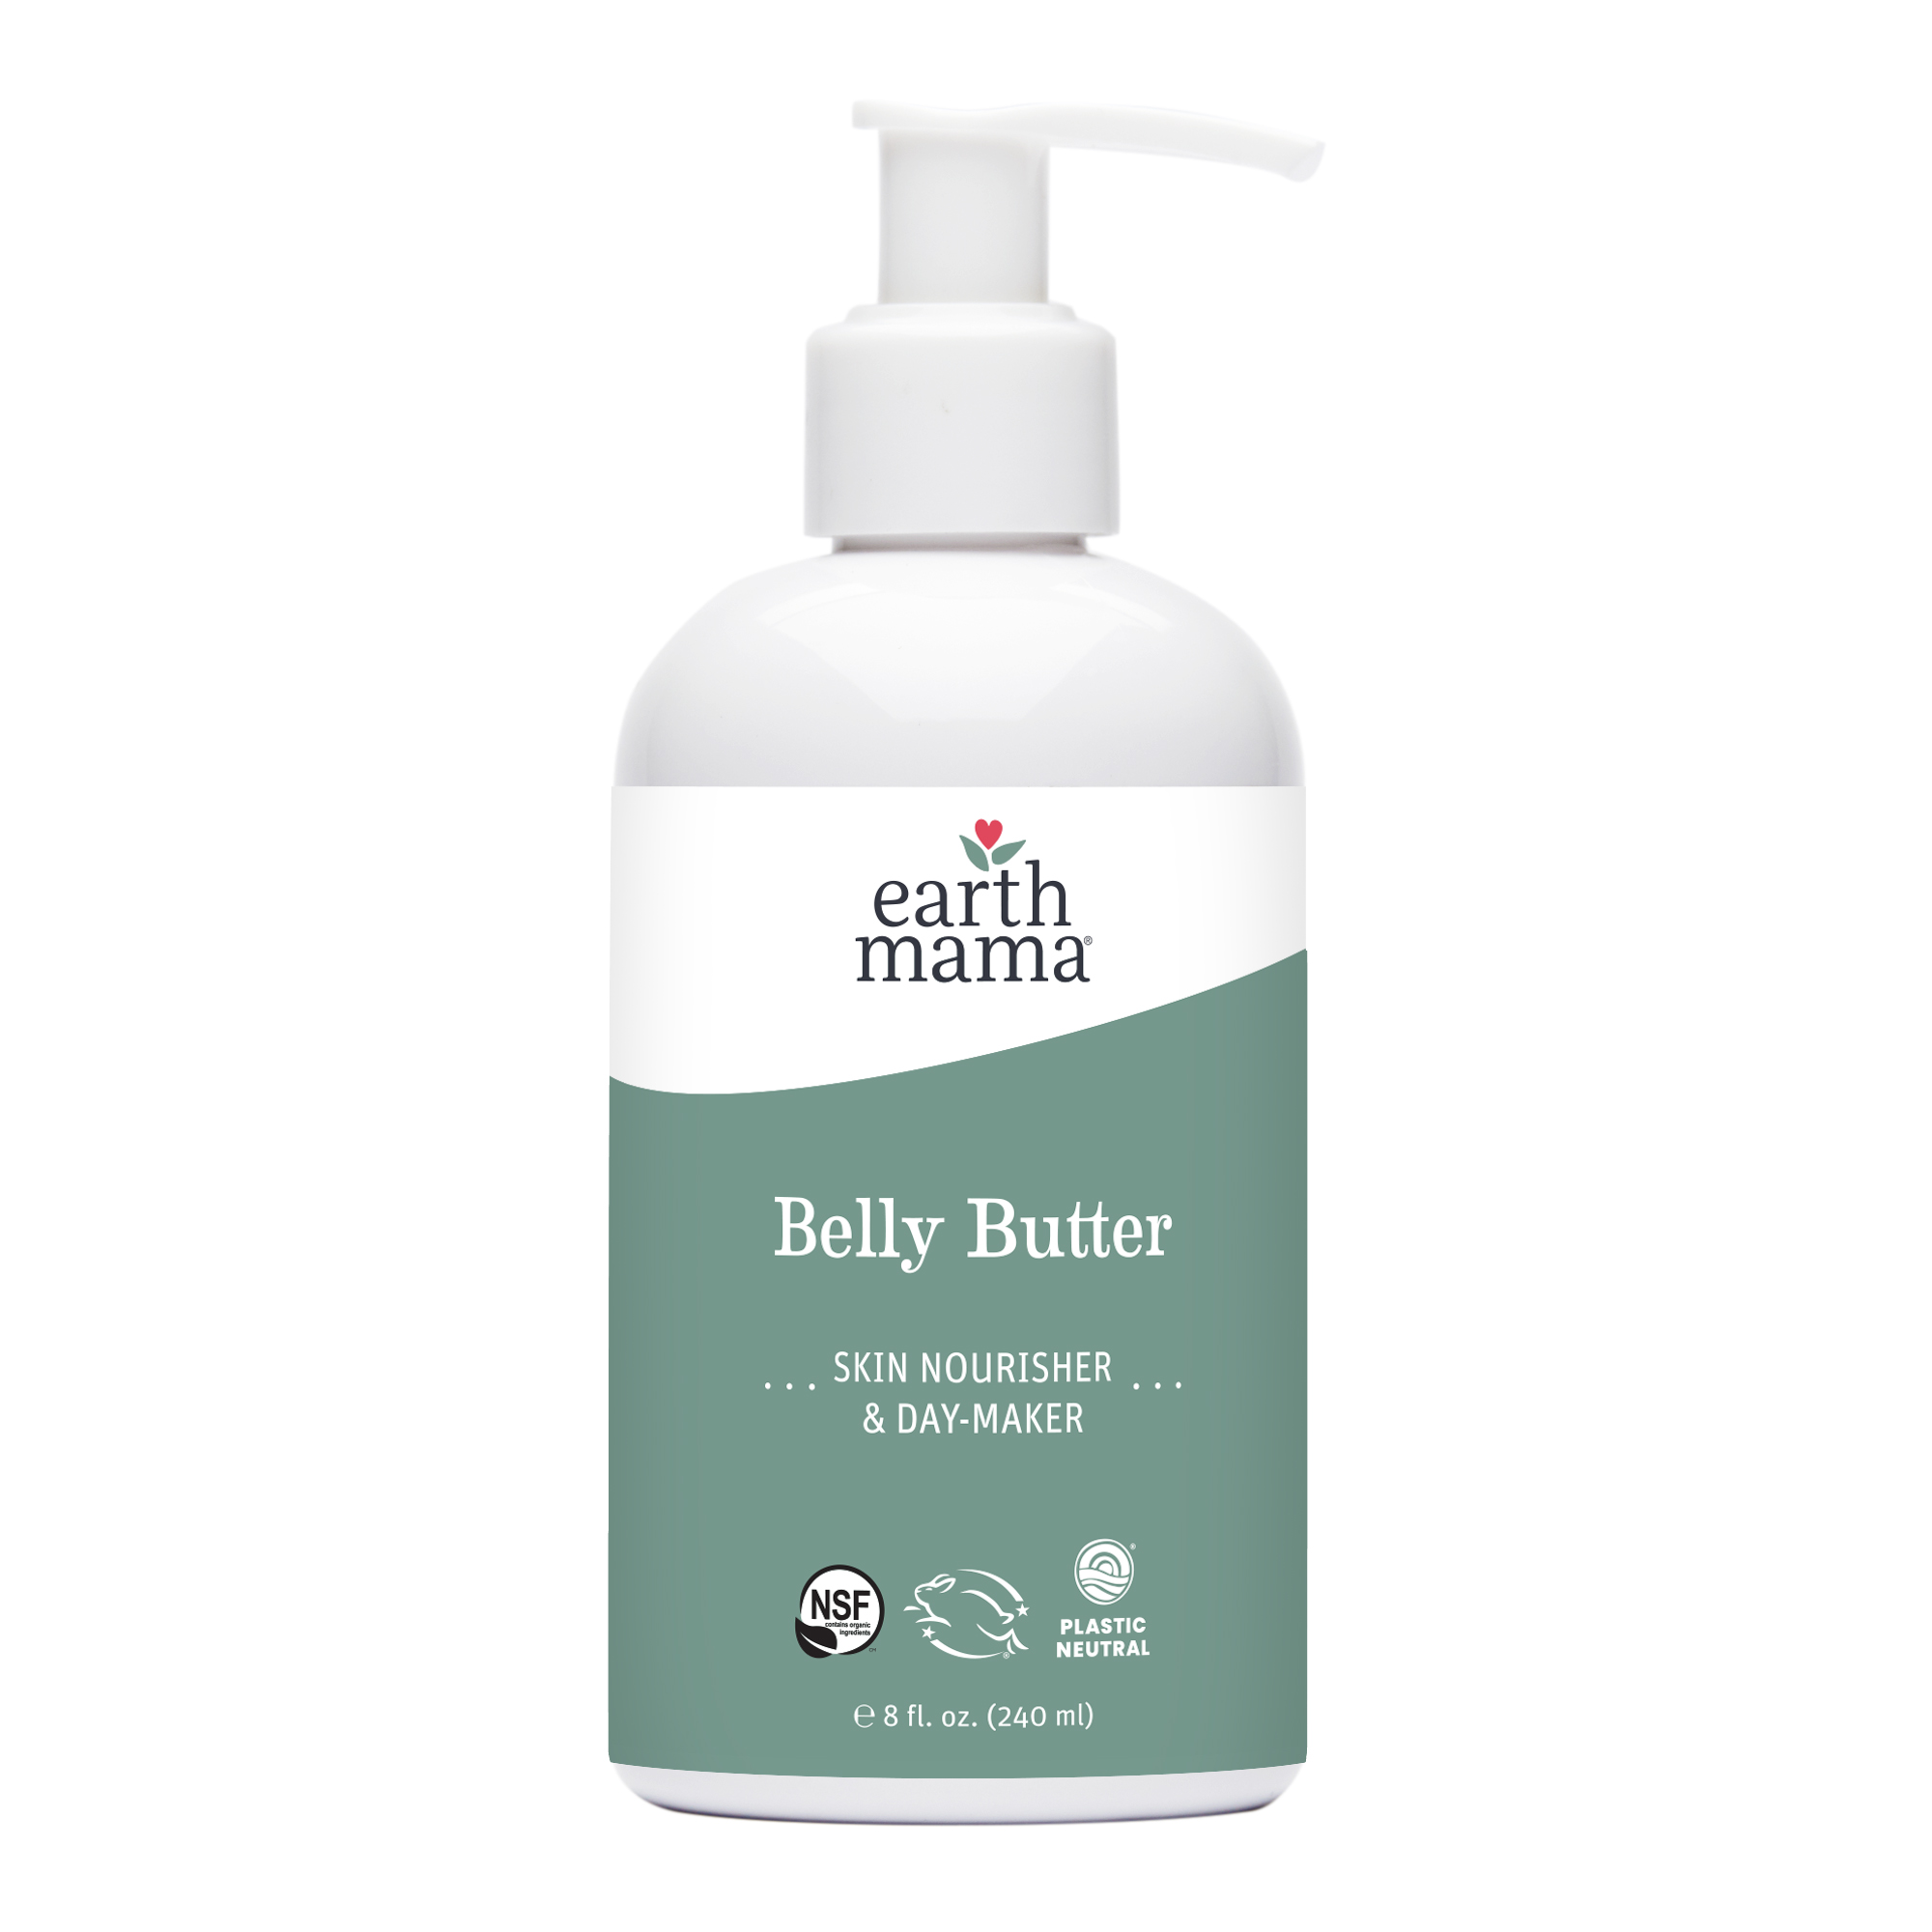 Earth Mama Belly Butter - image 1 of 5